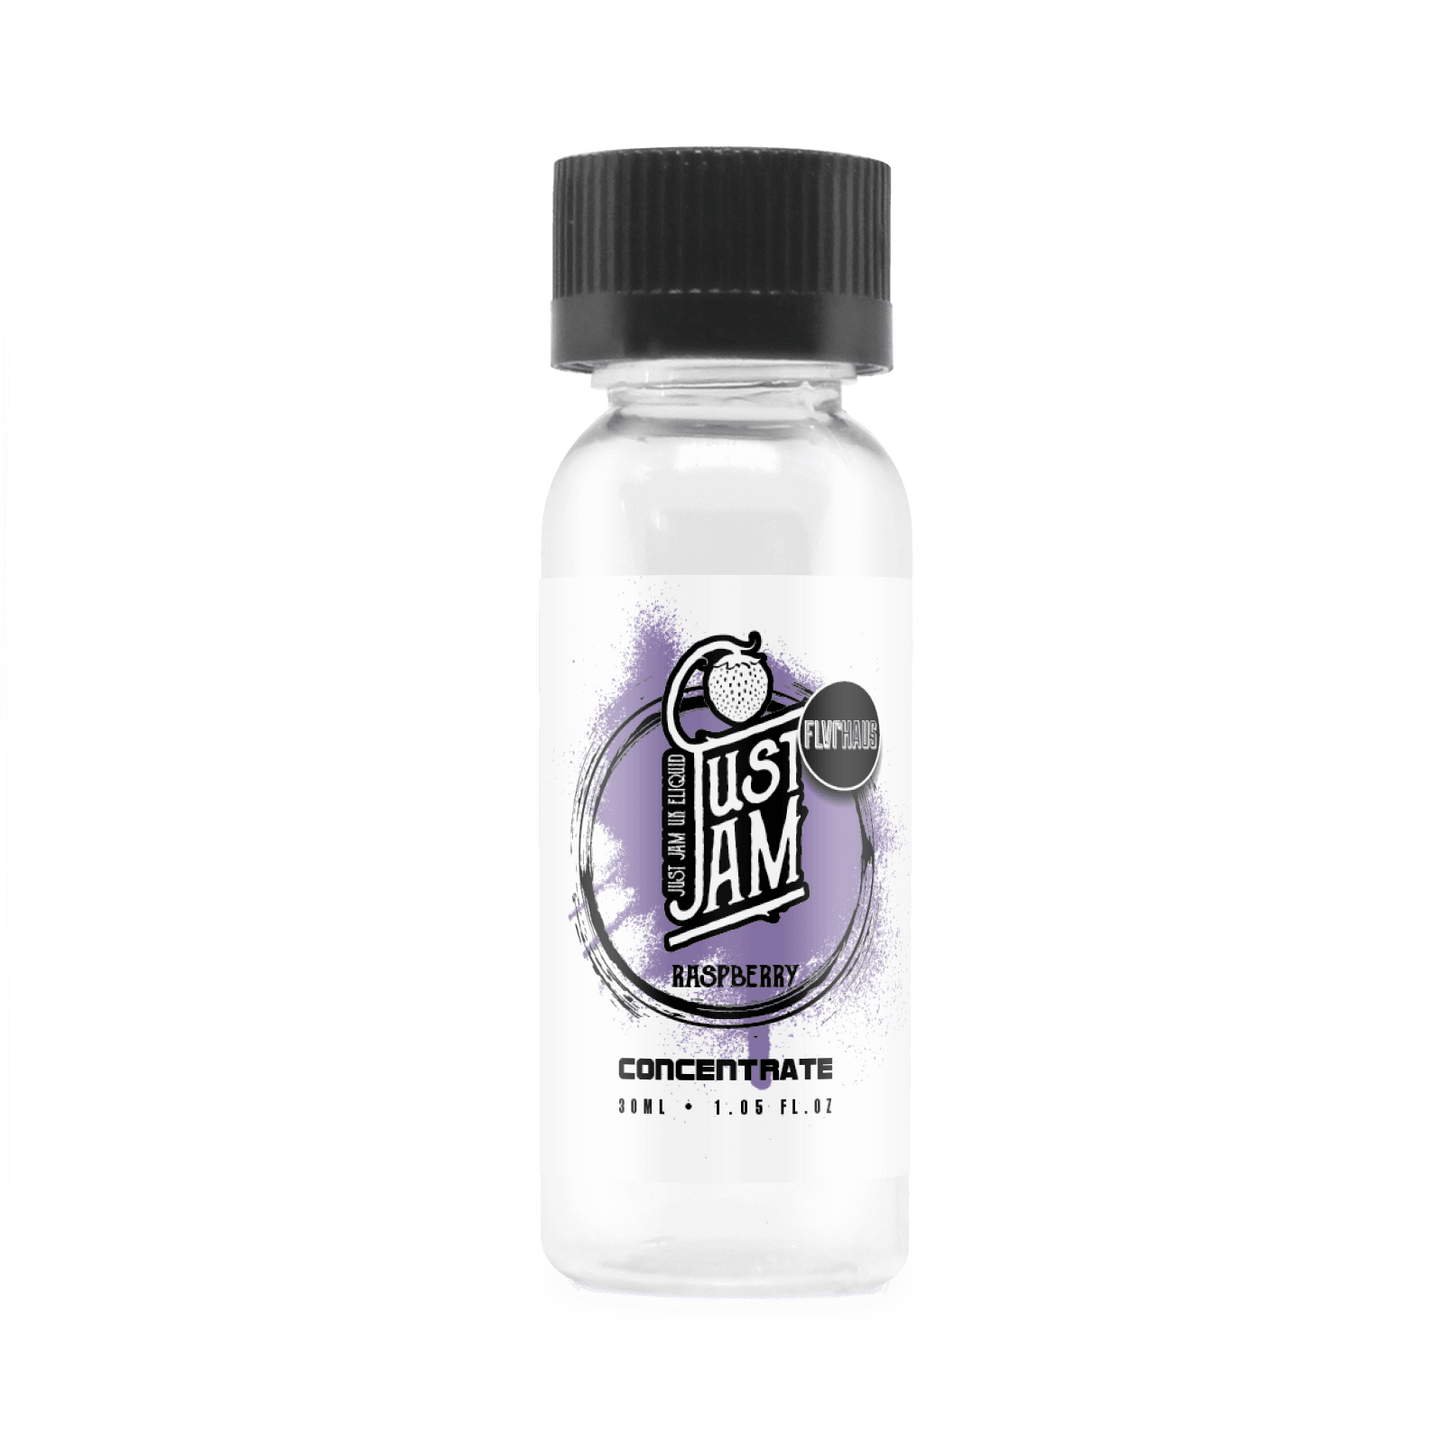 Just Jam - Raspberry Concentrate 30ml - The Ace Of Vapez